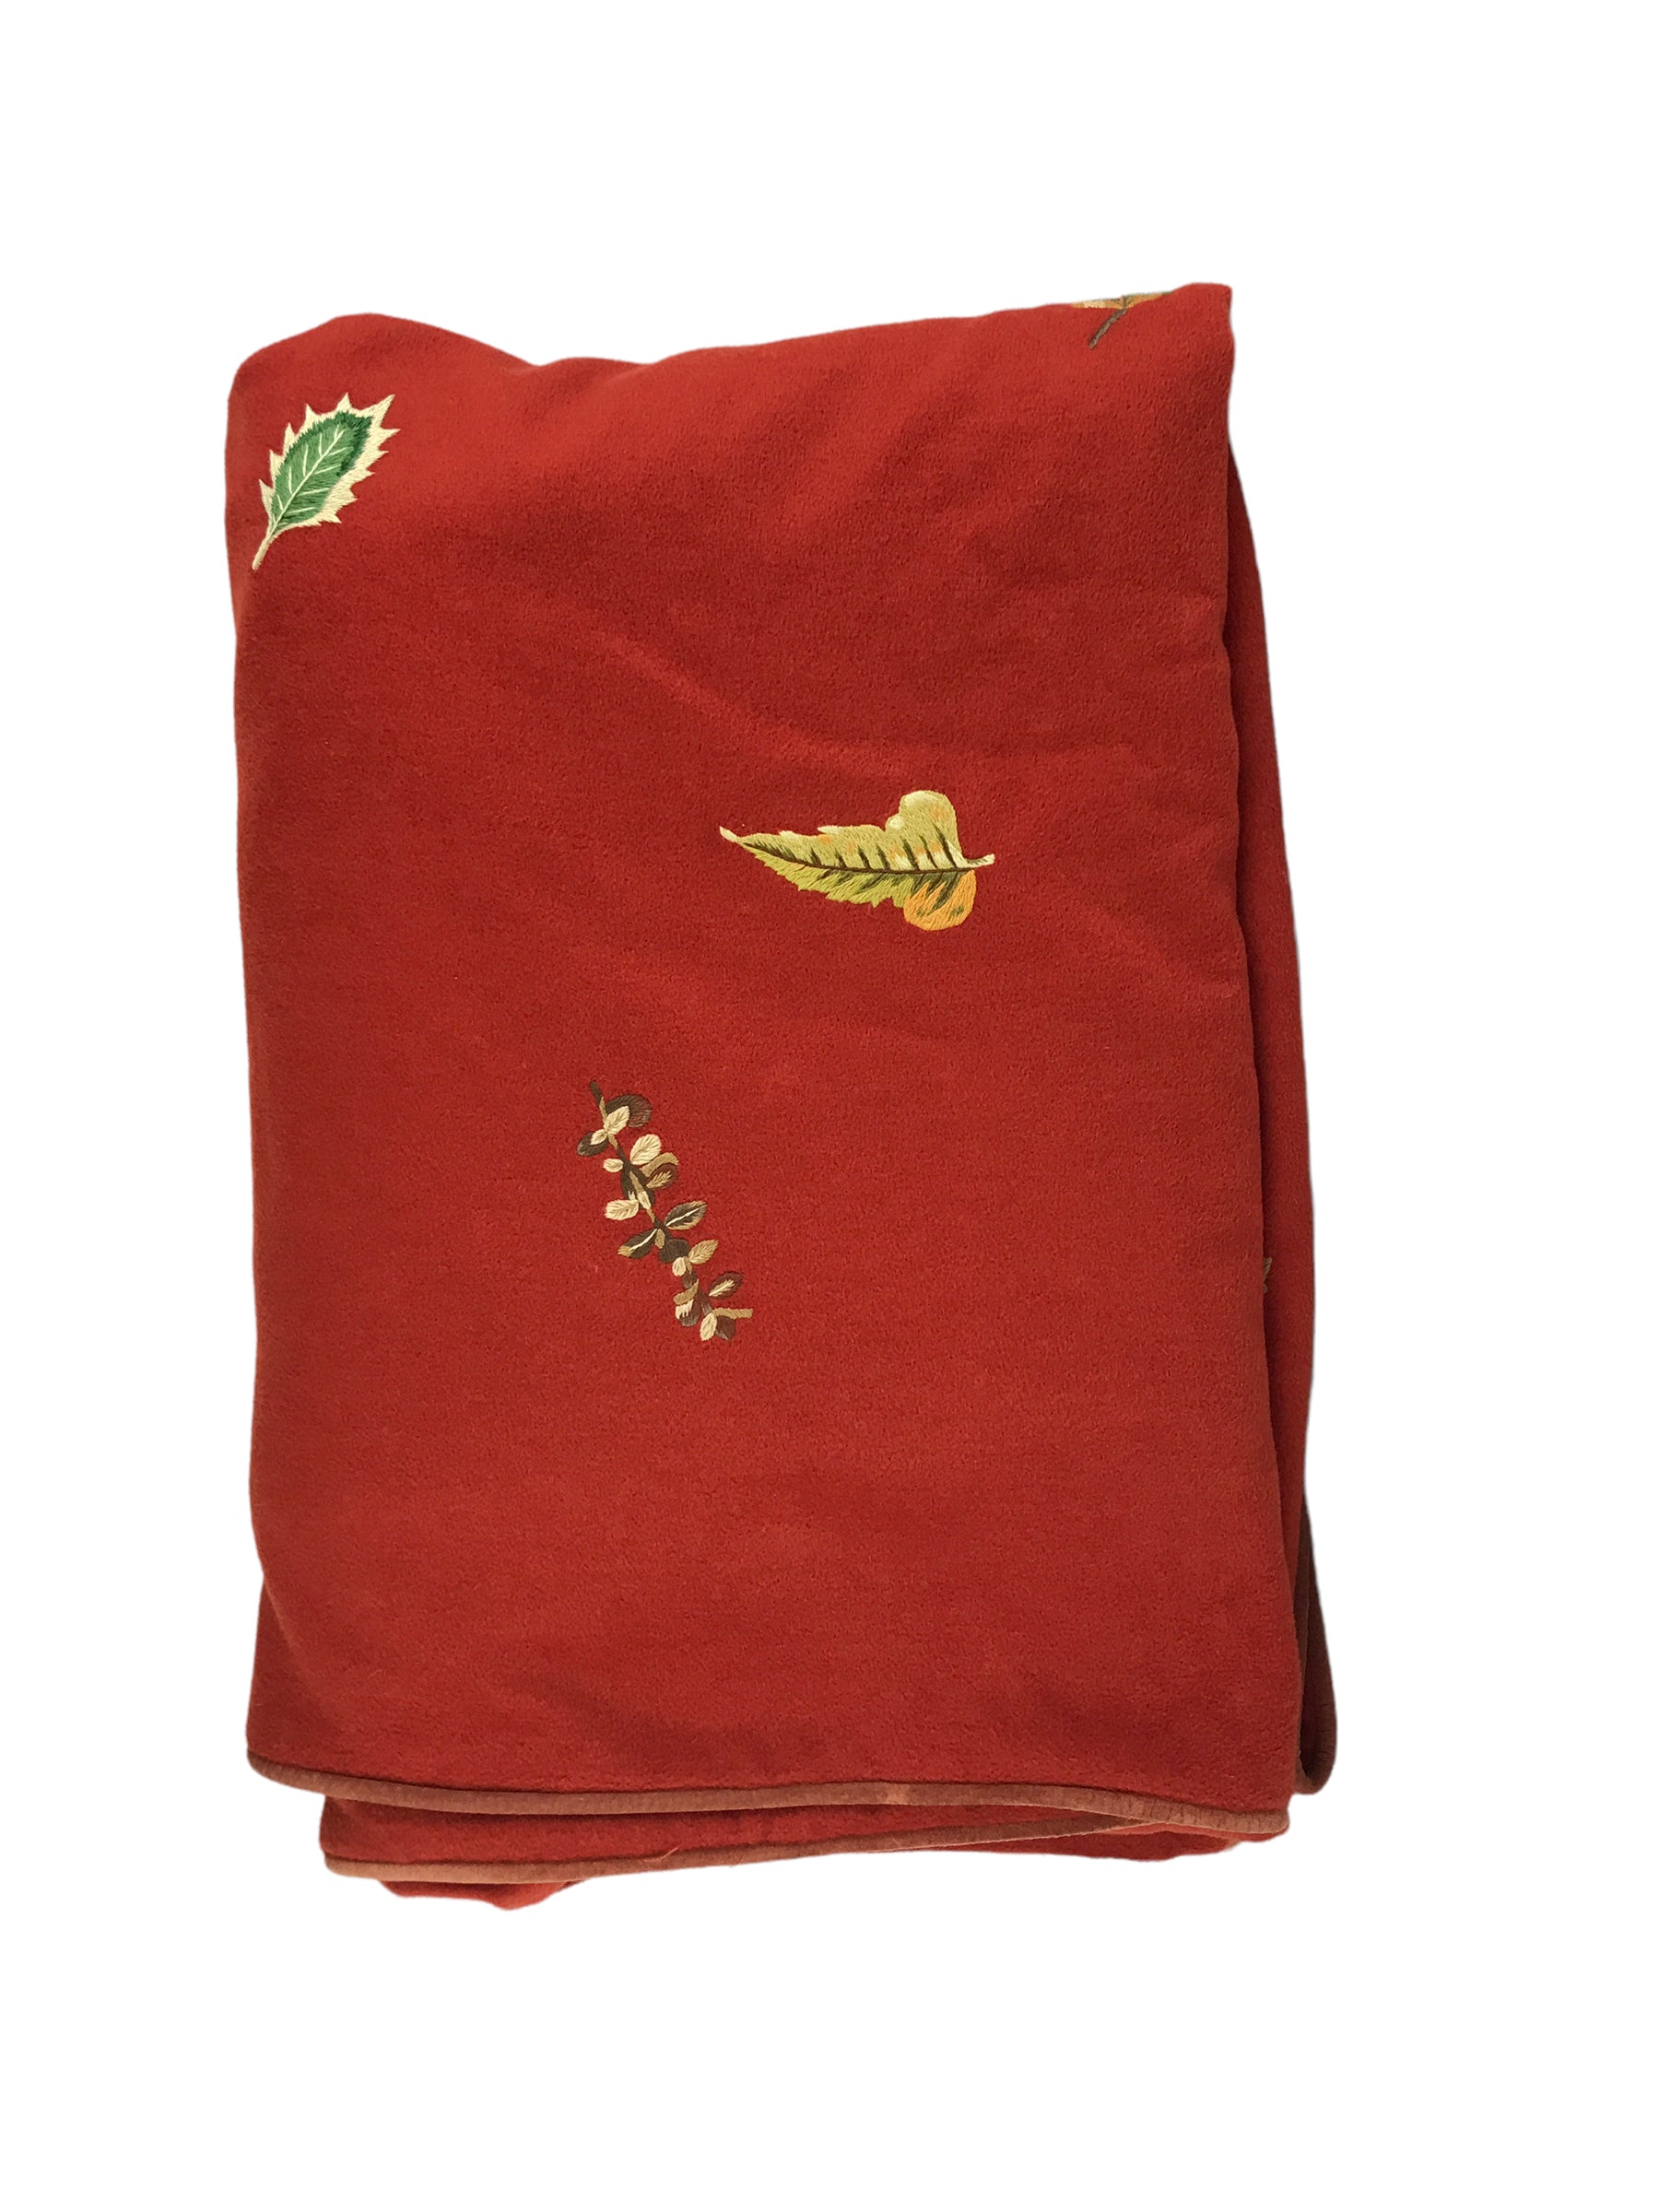 Vintage 80's-90's Exceptional Leaves Walk-In The Park Embroidered Plaid Wool/Cashmere Throw w/Suede Goatskin